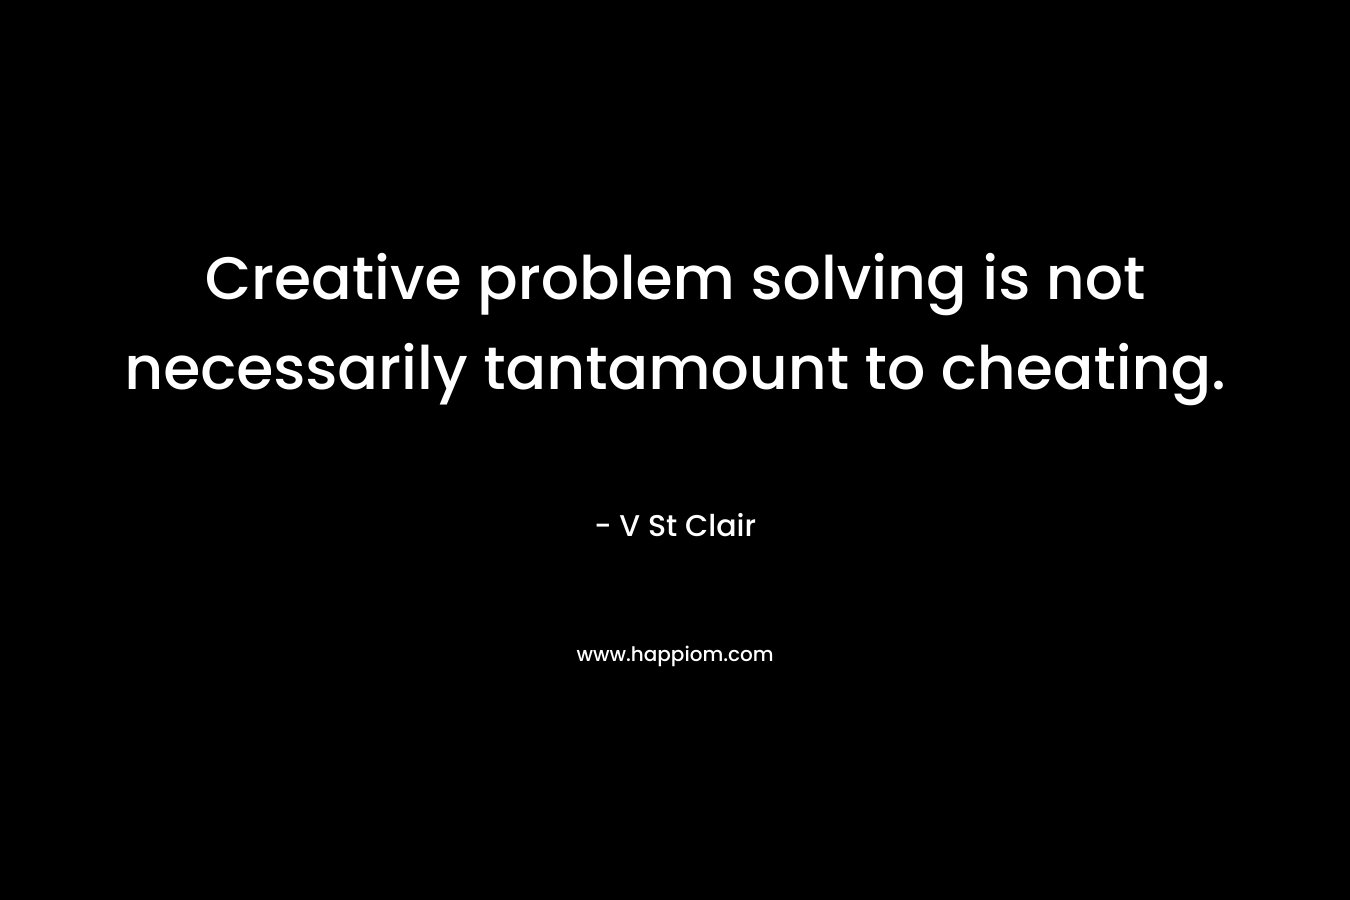 Creative problem solving is not necessarily tantamount to cheating.